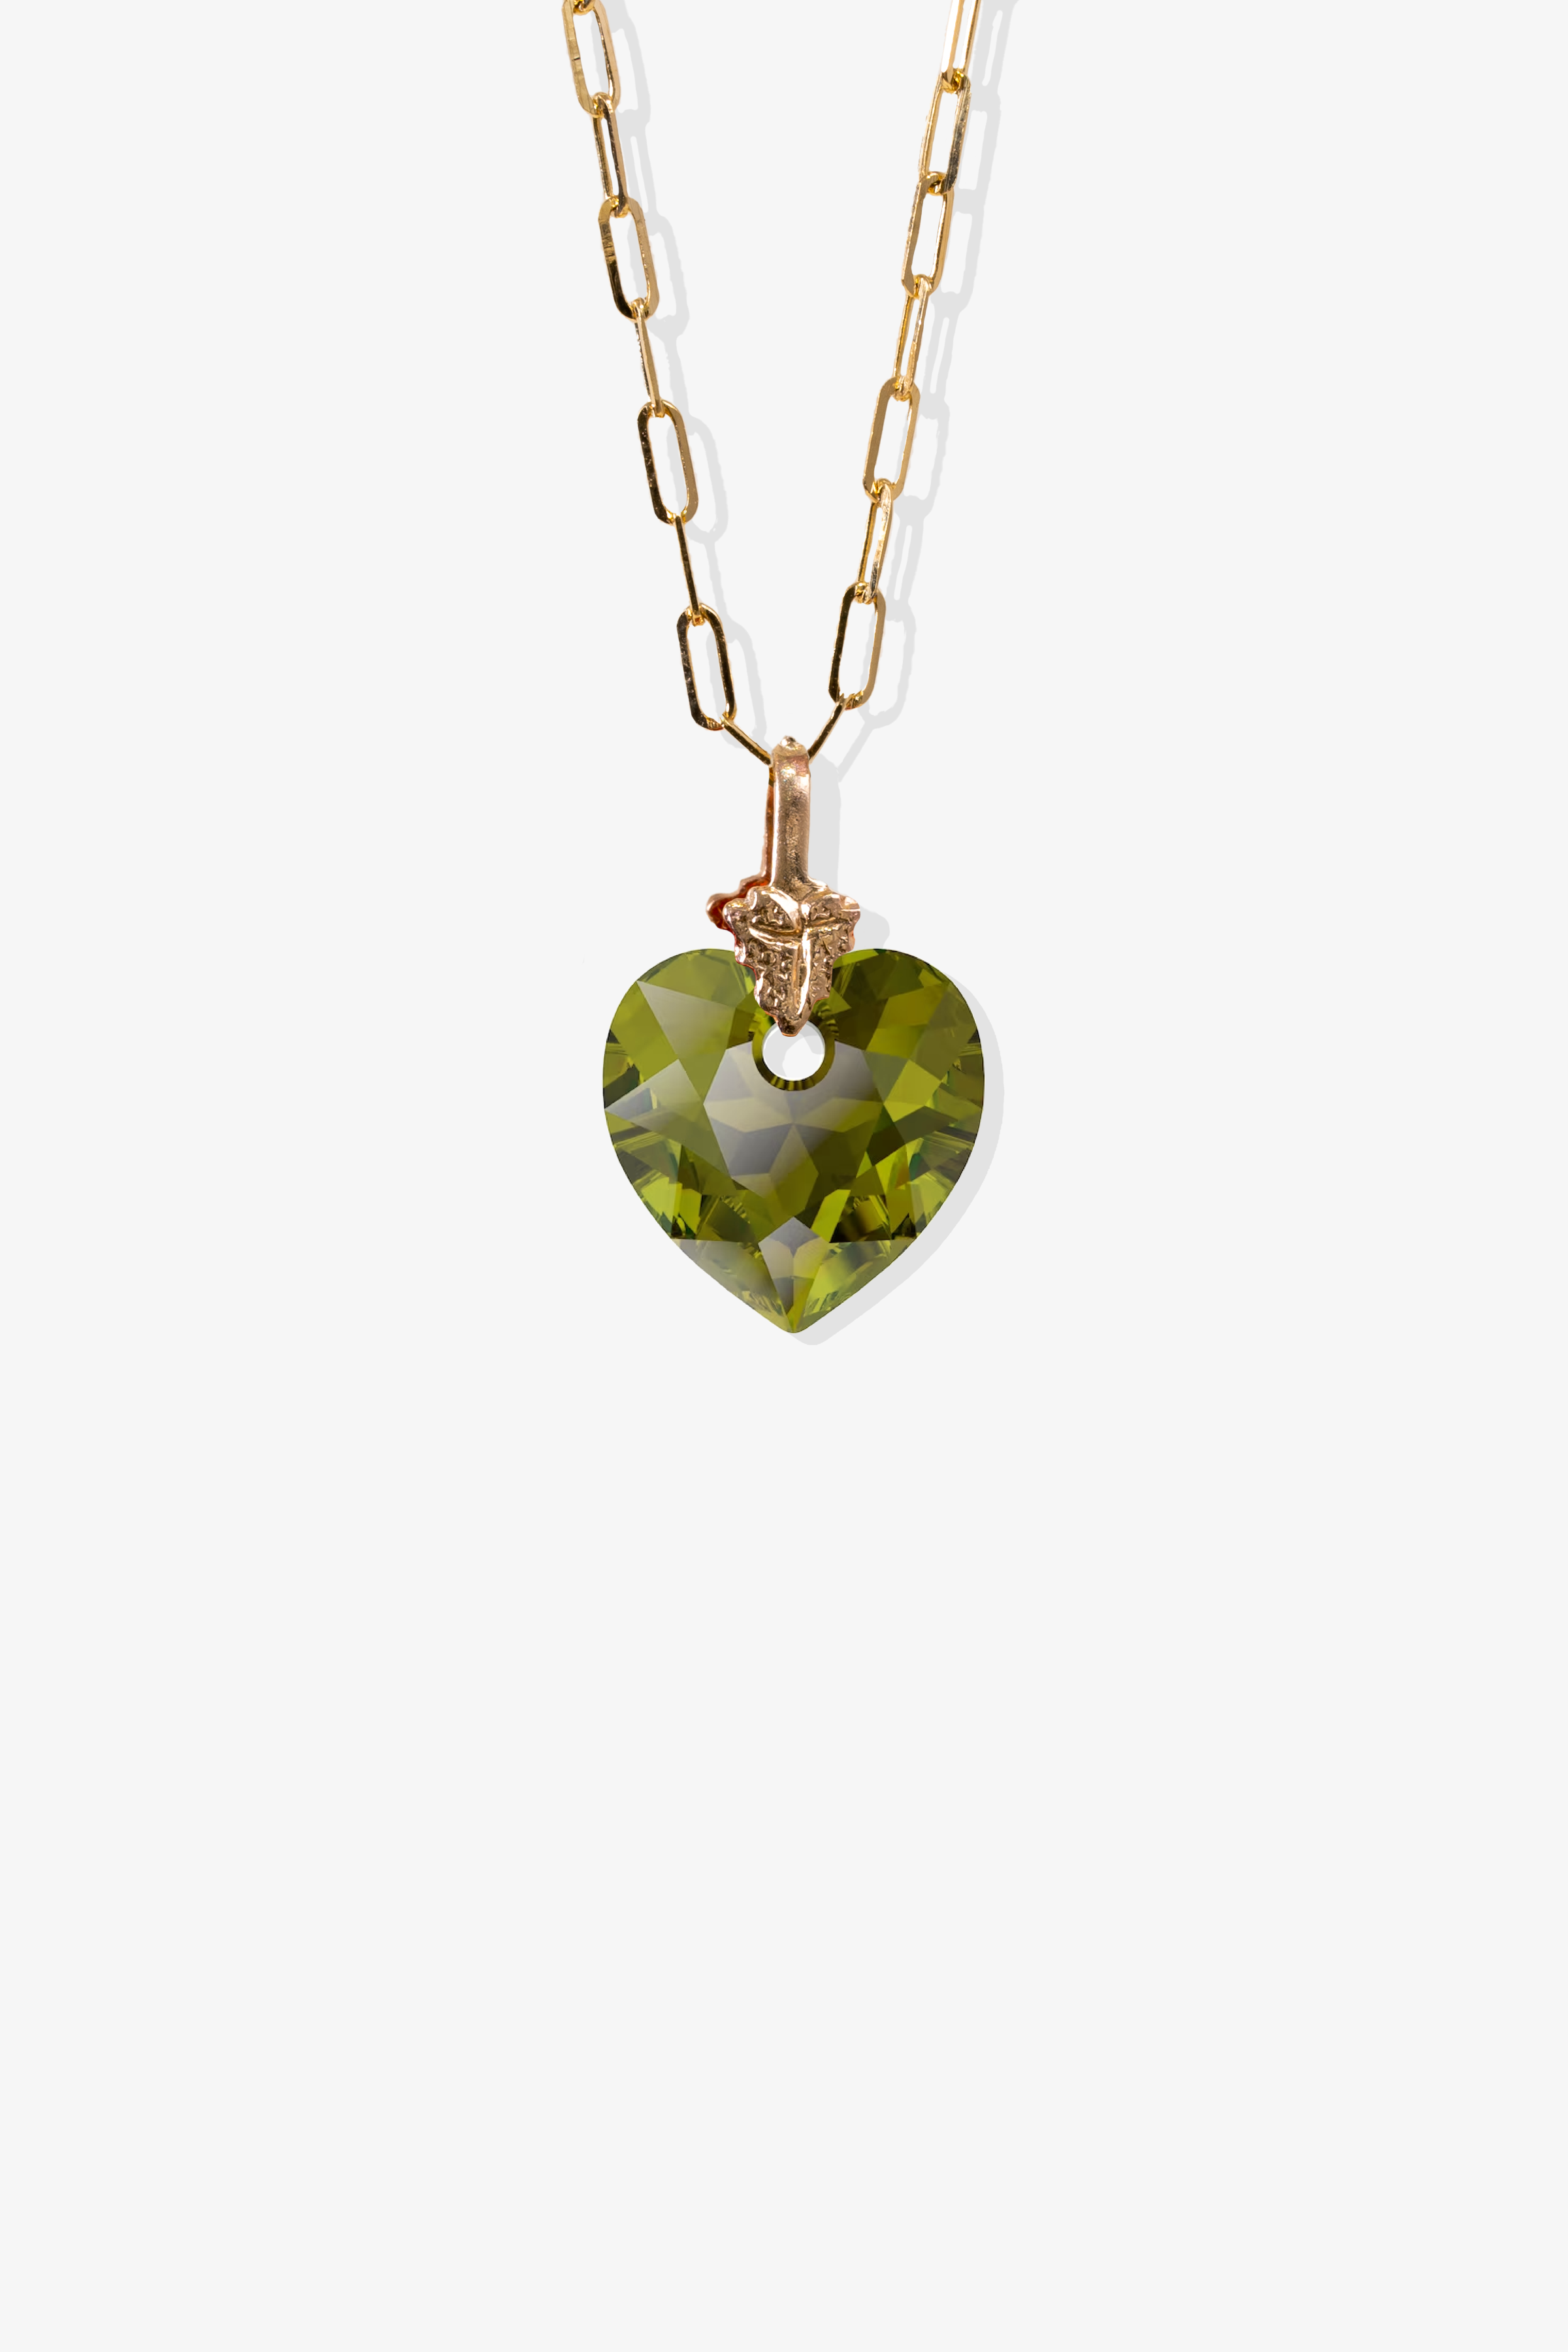 Petite Swarovski Xilion Olive Green Crystal Heart with REAL 14k Gold Paperclip Necklace